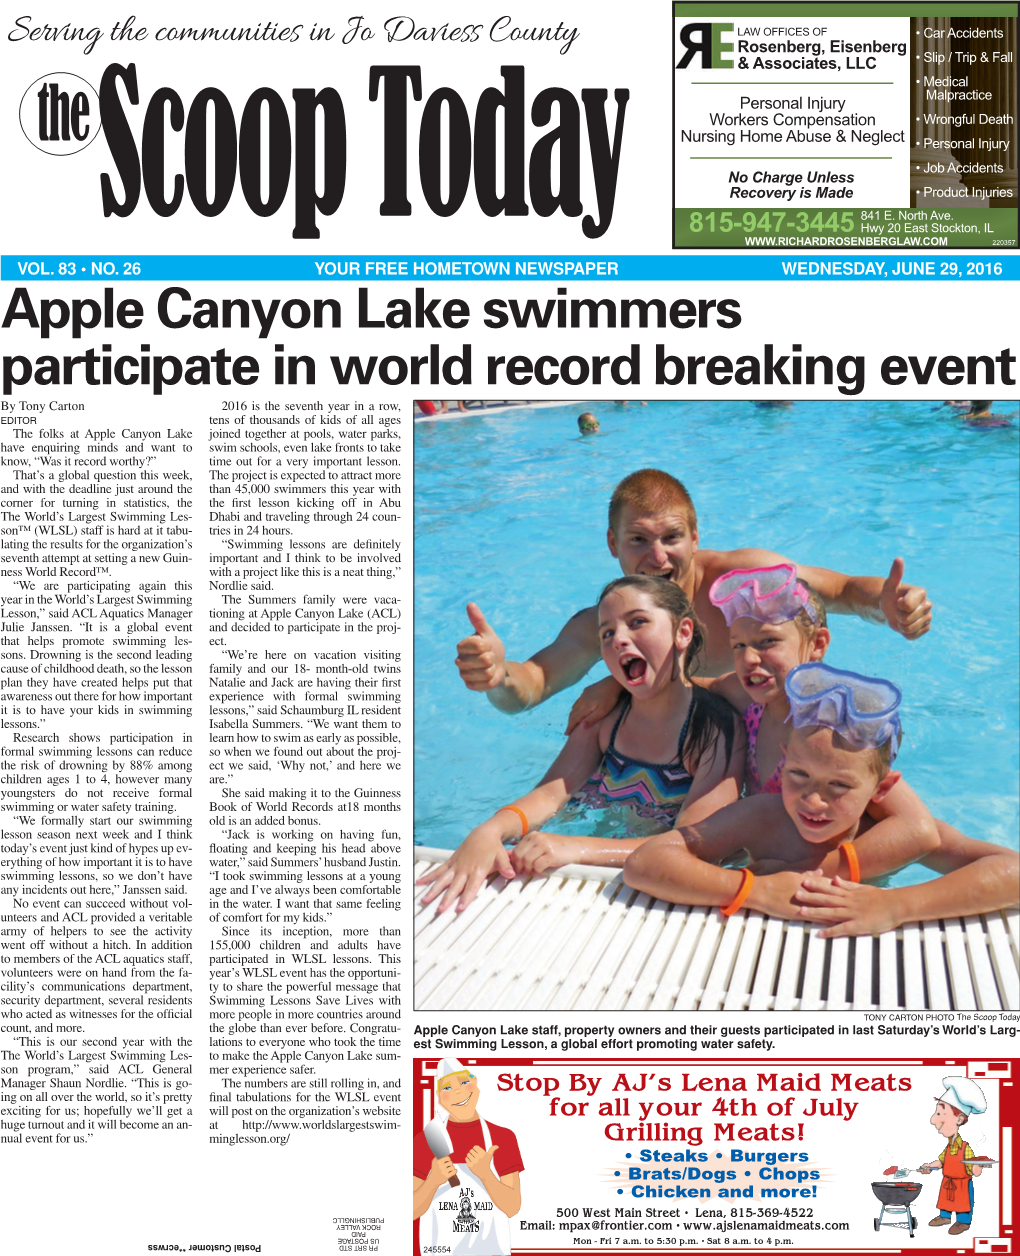 Apple Canyon Lake Swimmers Participate in World Record Breaking